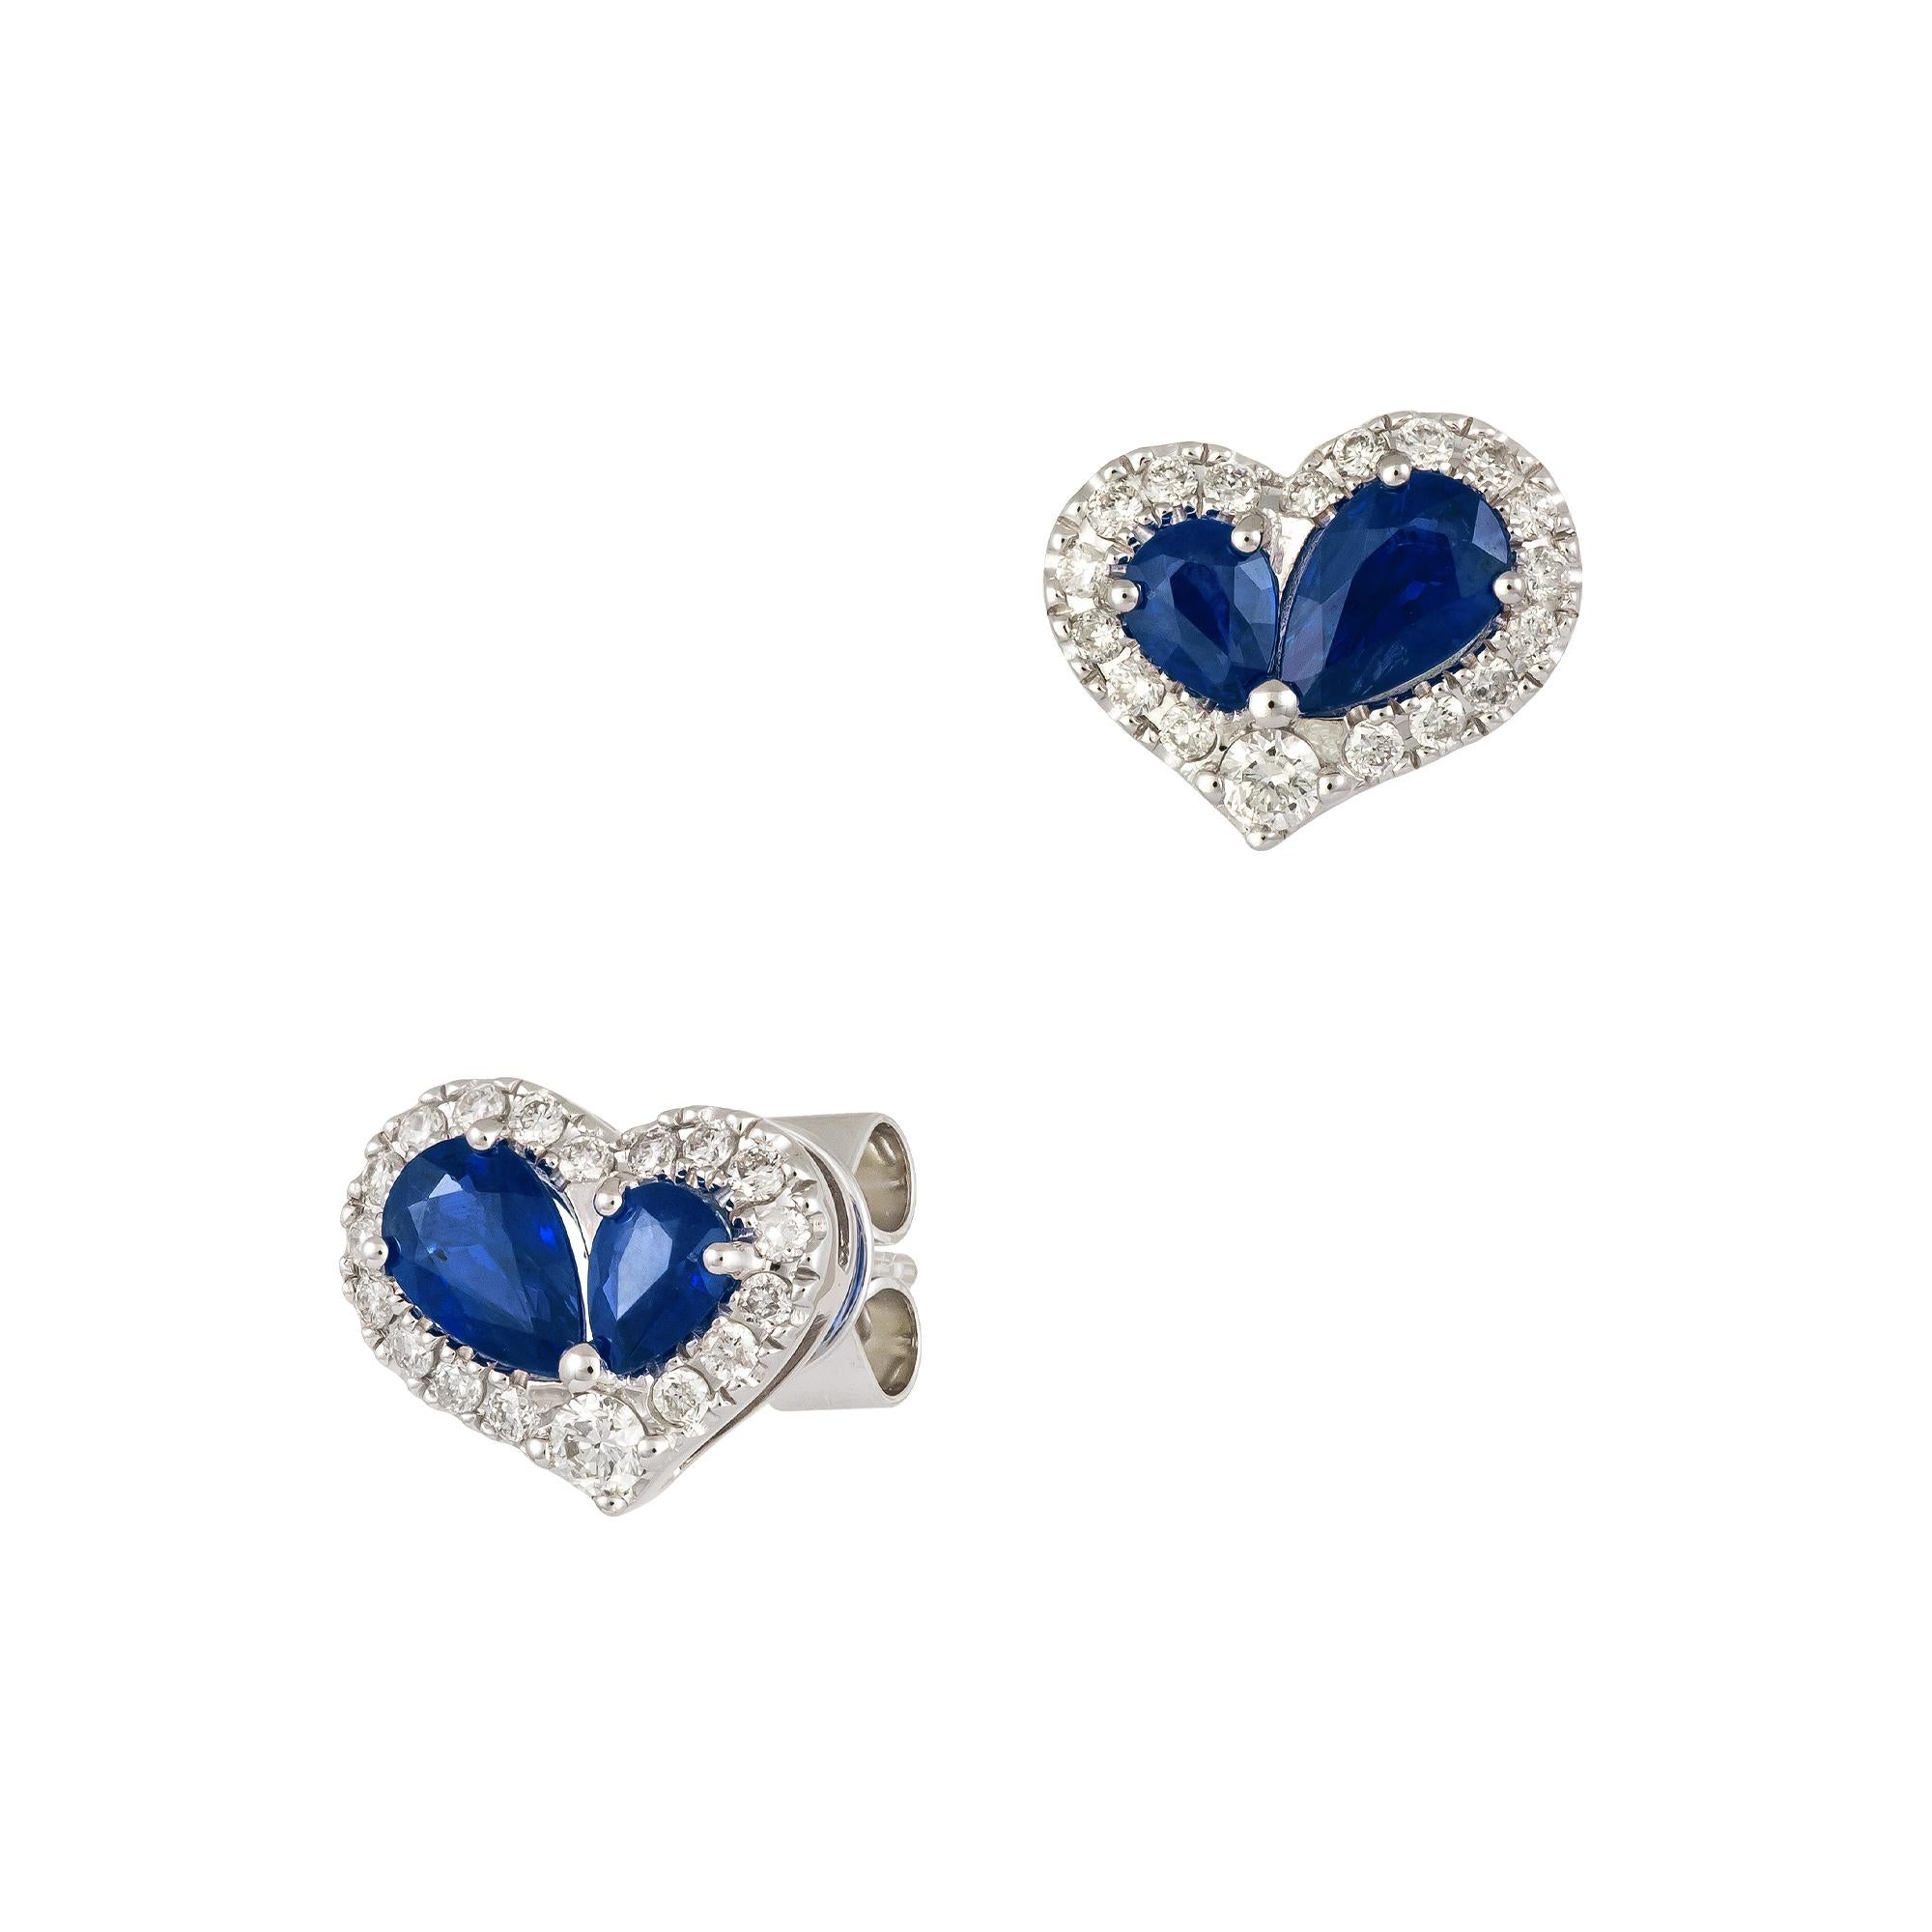 Earrings White Gold 14 K

Diamond 0.32 Cts/36 Pcs
Blue Sapphire 1.37 Cts/4 Pcs

Weight 2,60 grams


With a heritage of ancient fine Swiss jewelry traditions, NATKINA is a Geneva based jewellery brand, which creates modern jewellery masterpieces